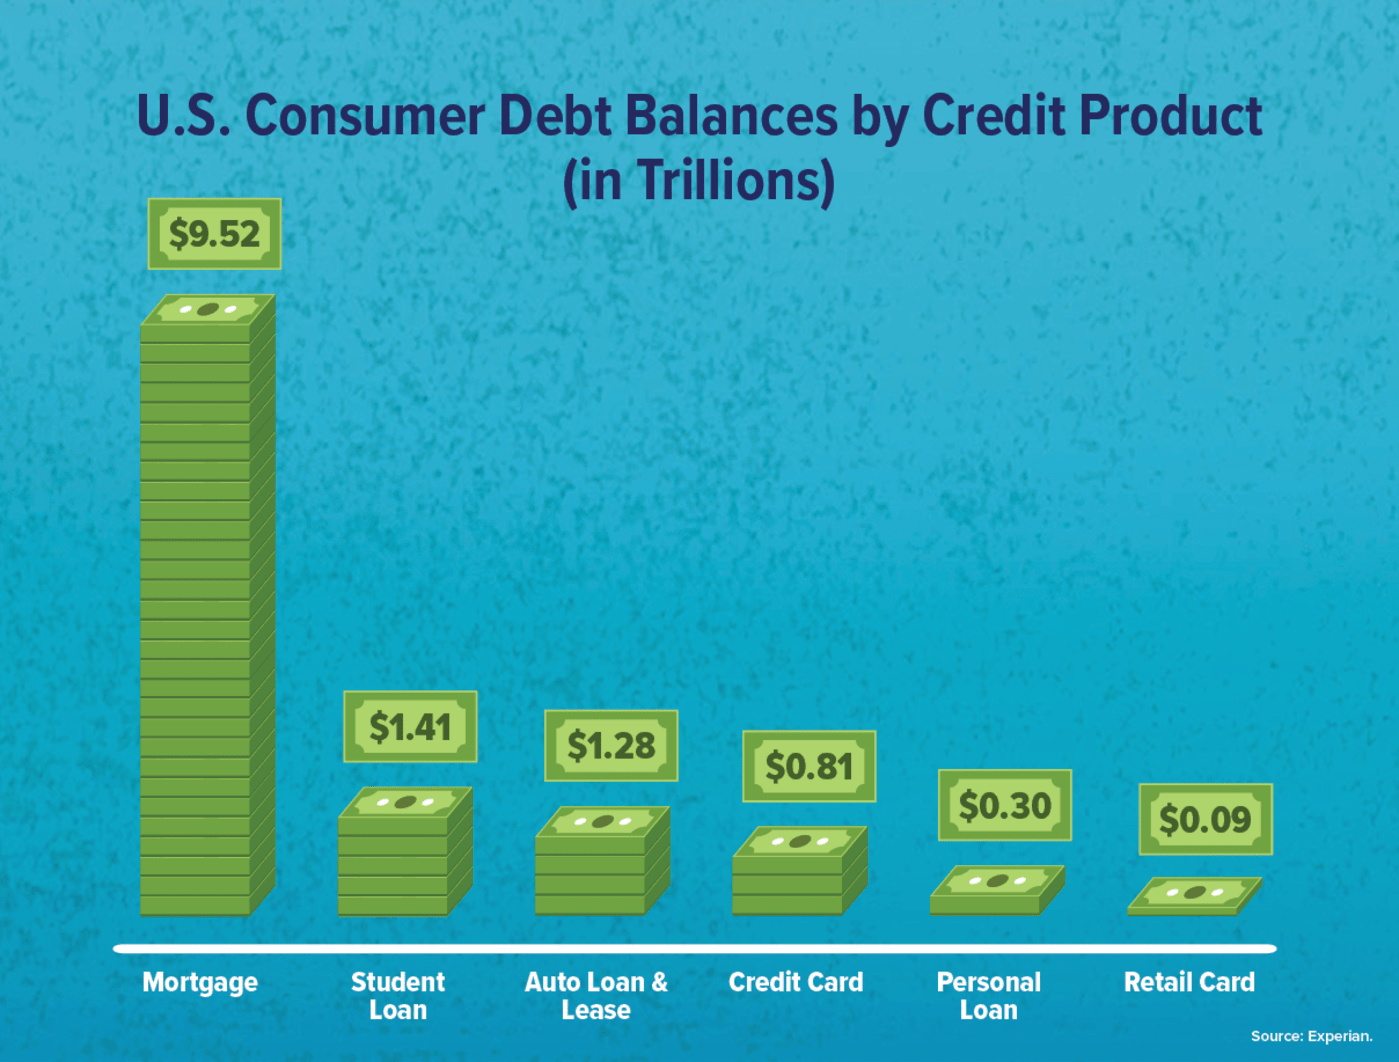 U.S. consumer debt balances by credit product graphic